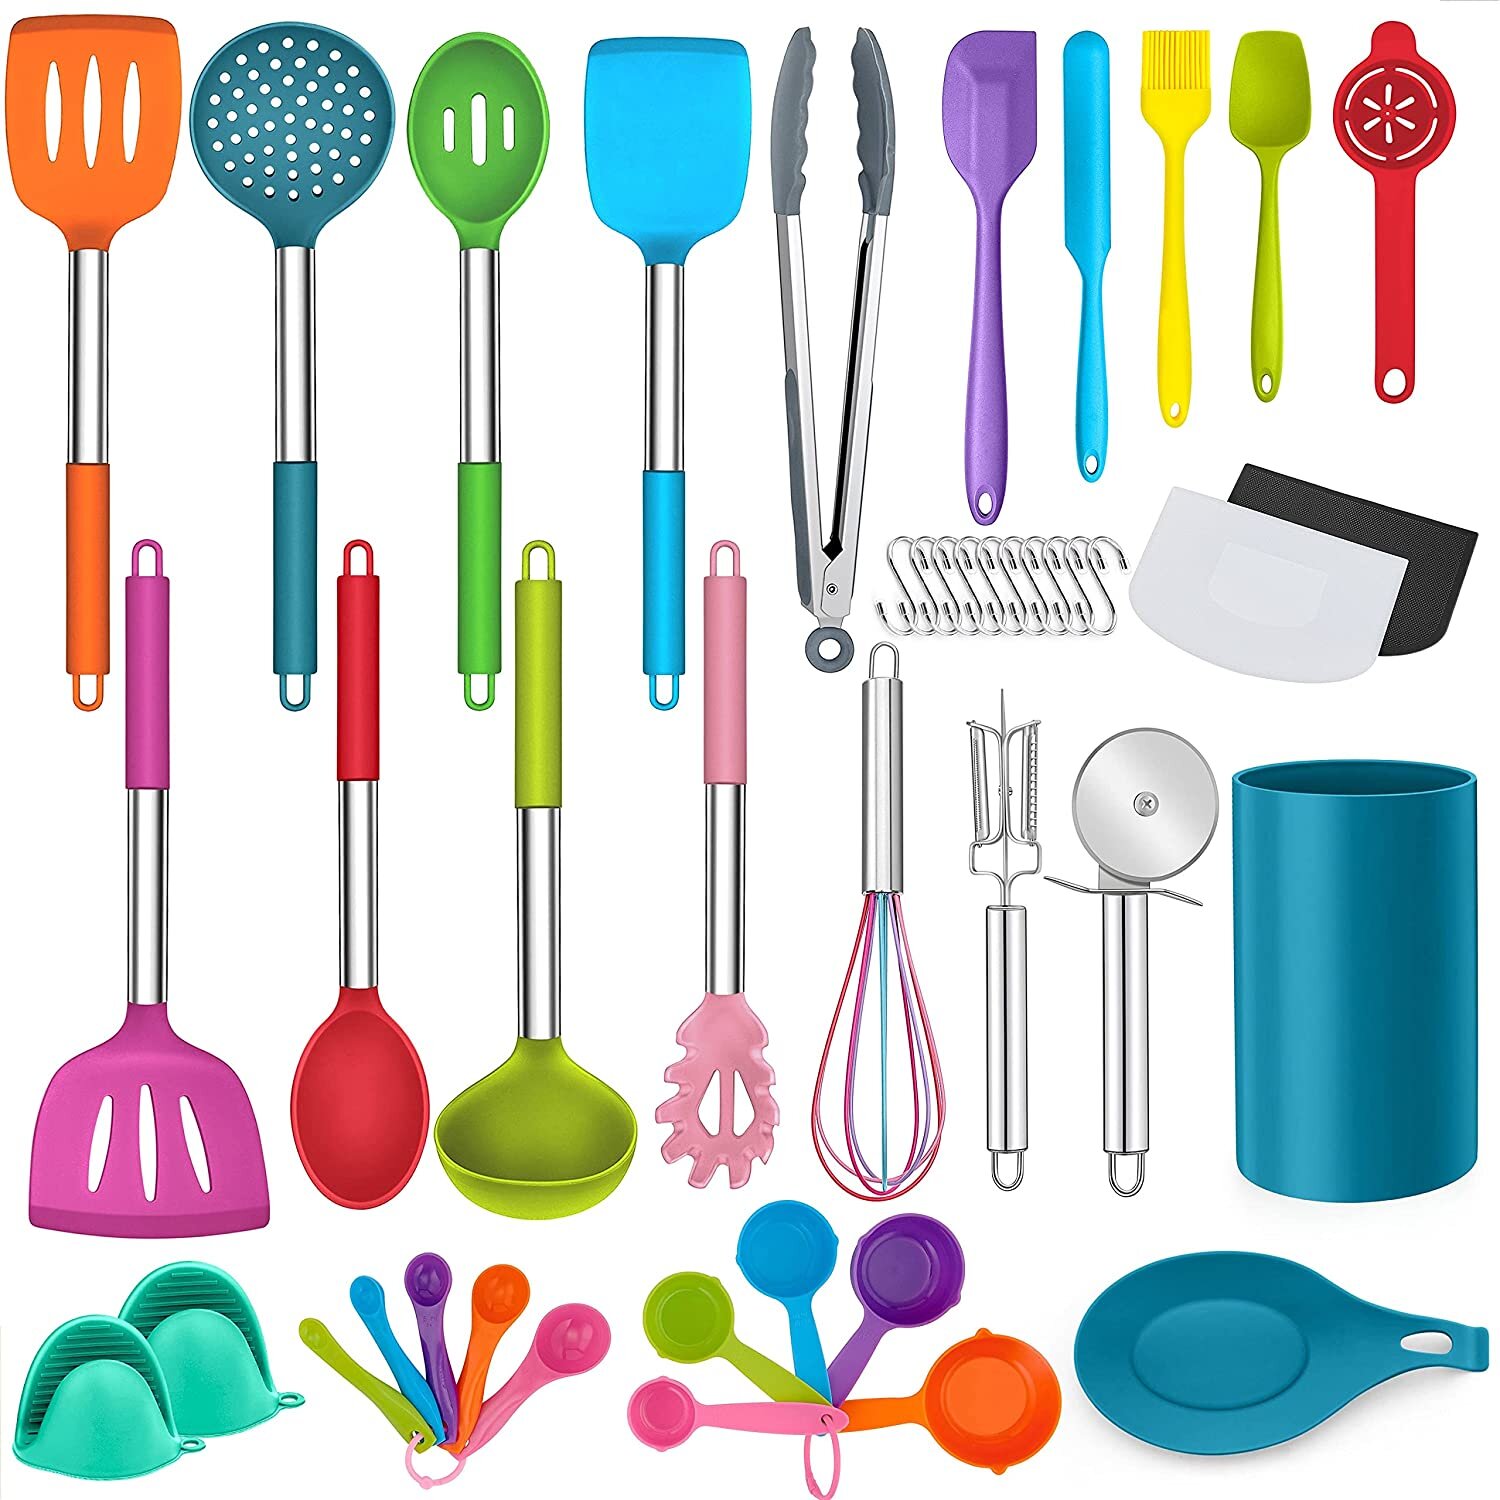 Nutrichef 10 PCS. Silicone Heat Resistant Kitchen Cooking Utensils Set - Non-Stick Baking Tools with PP Holder (Blue & Black)